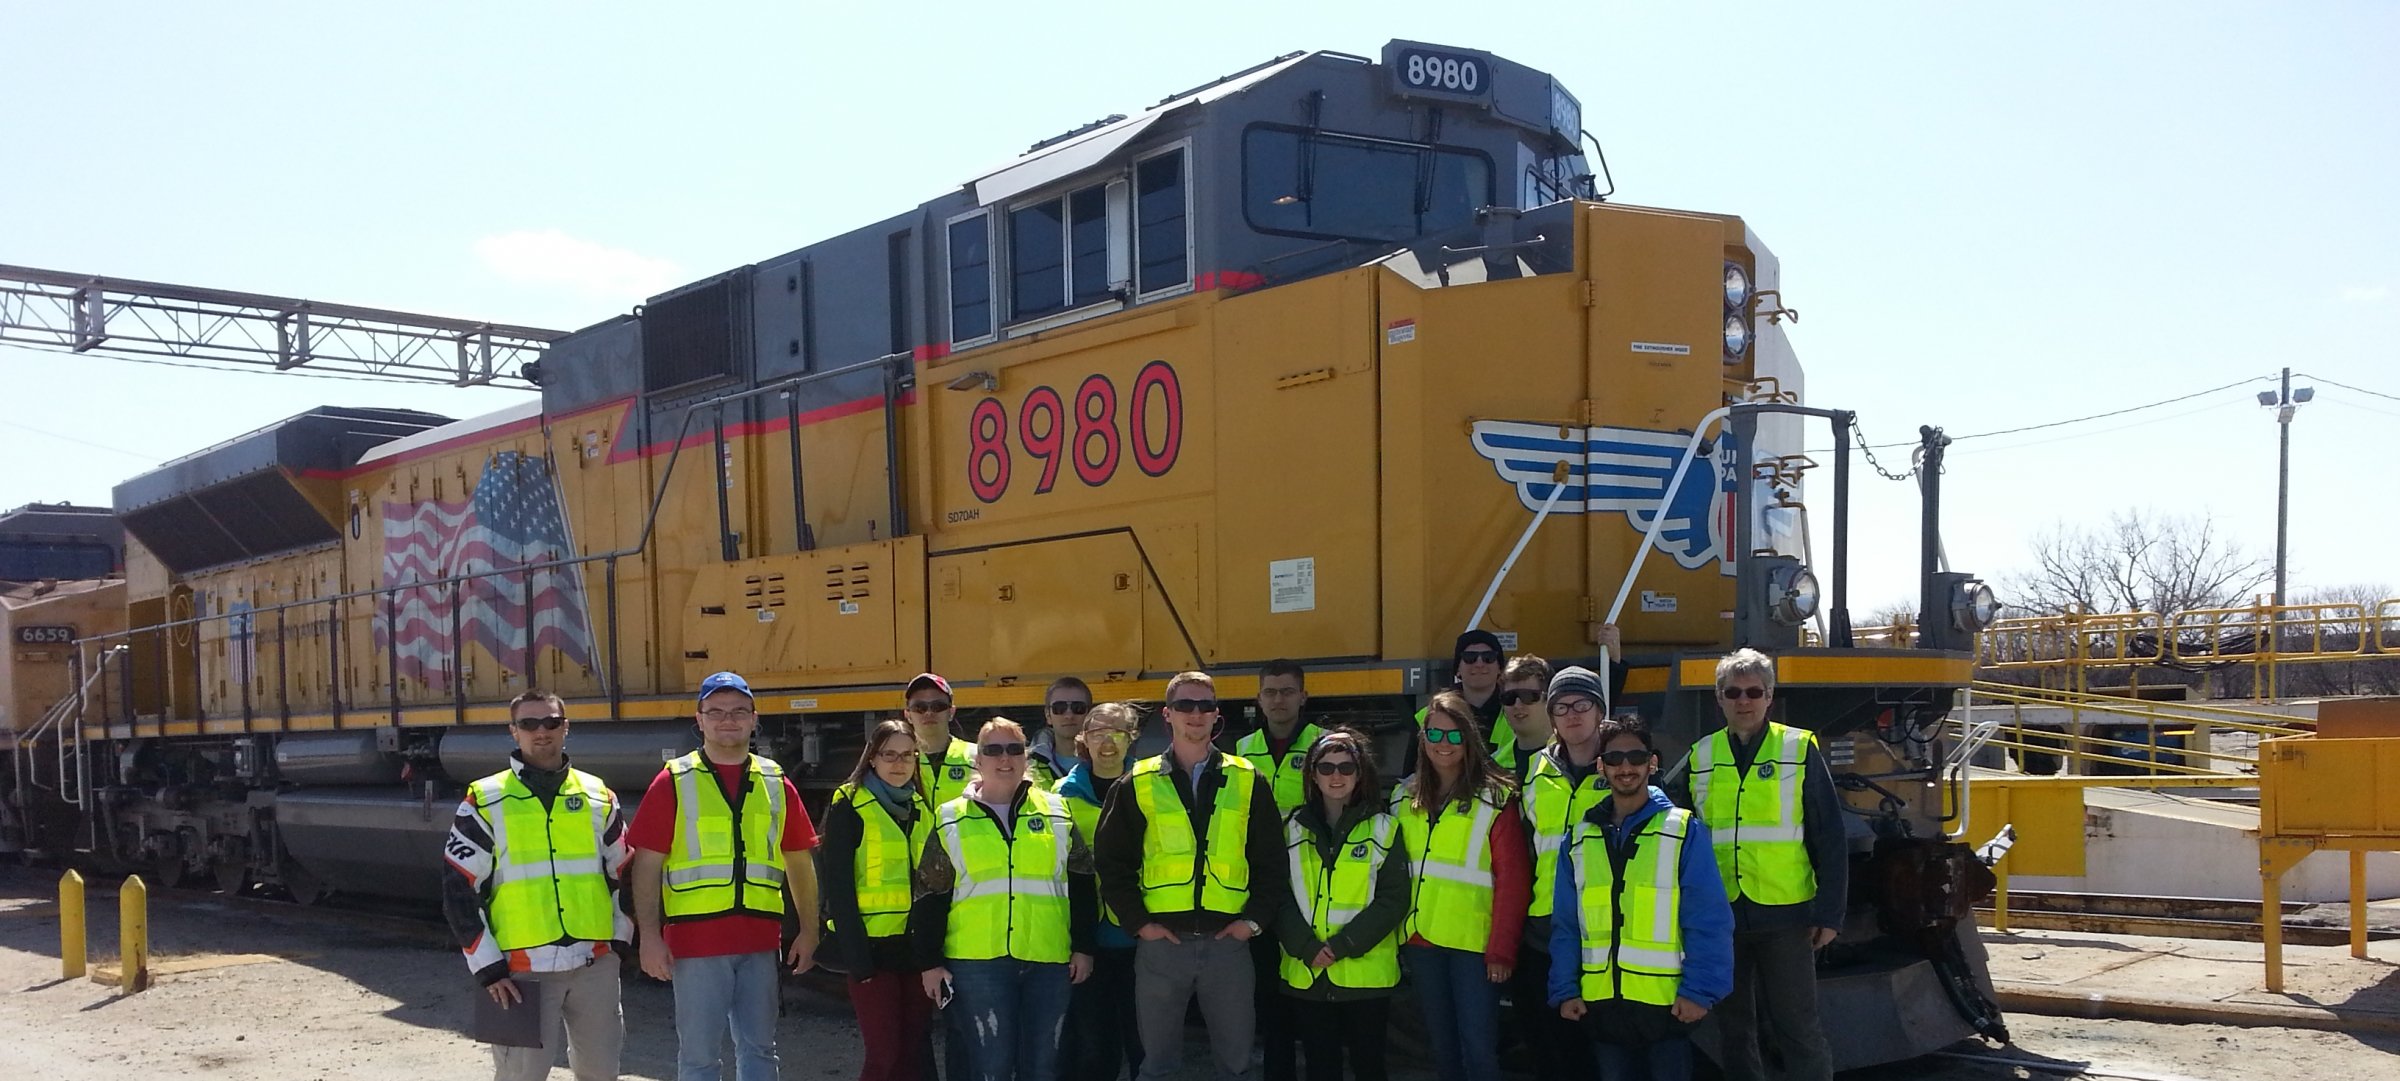 REAC students on a spring trip stand by a locomotive.